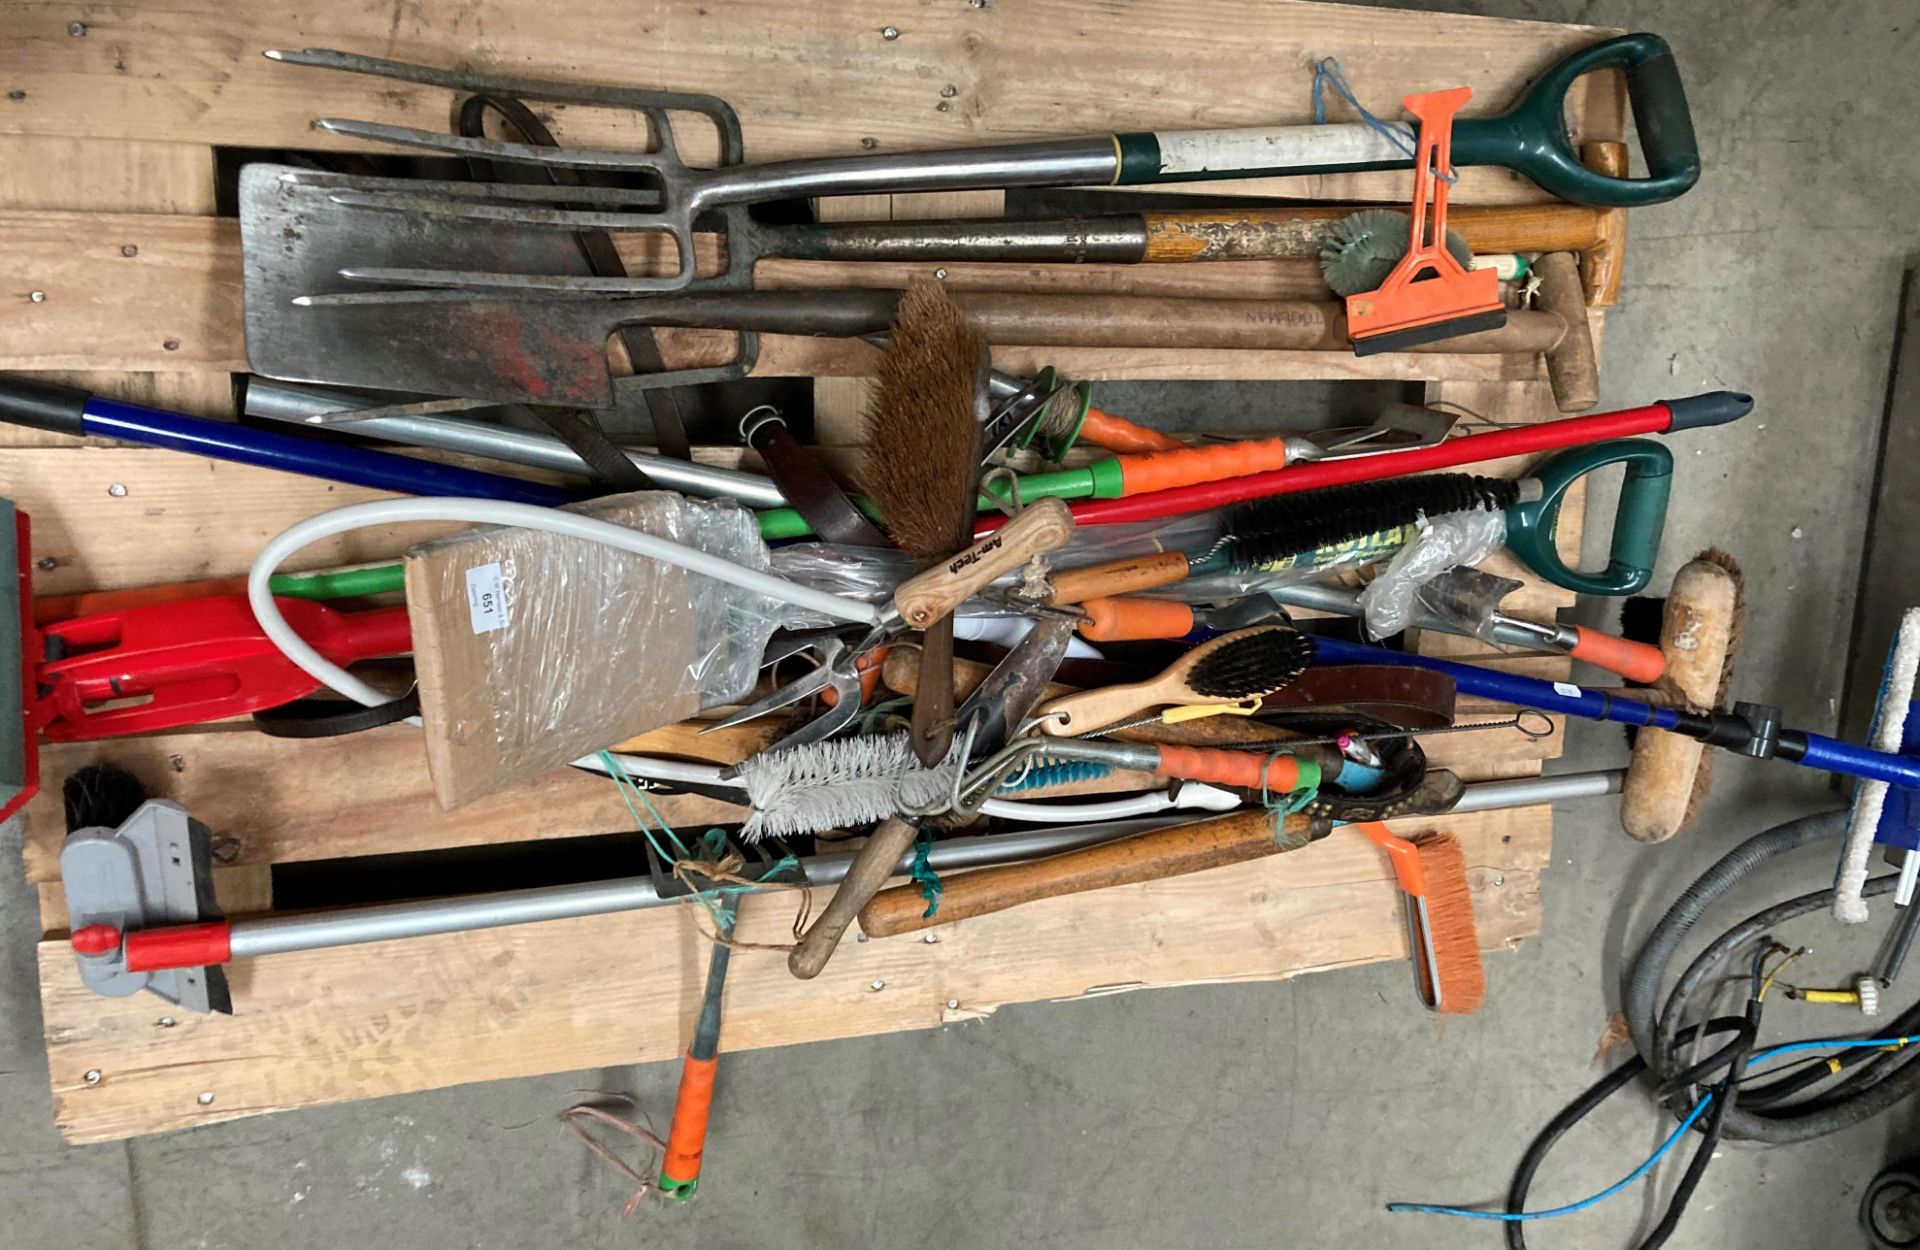 Contents to pallet - gardening and other tools (saleroom location: C01/D01)